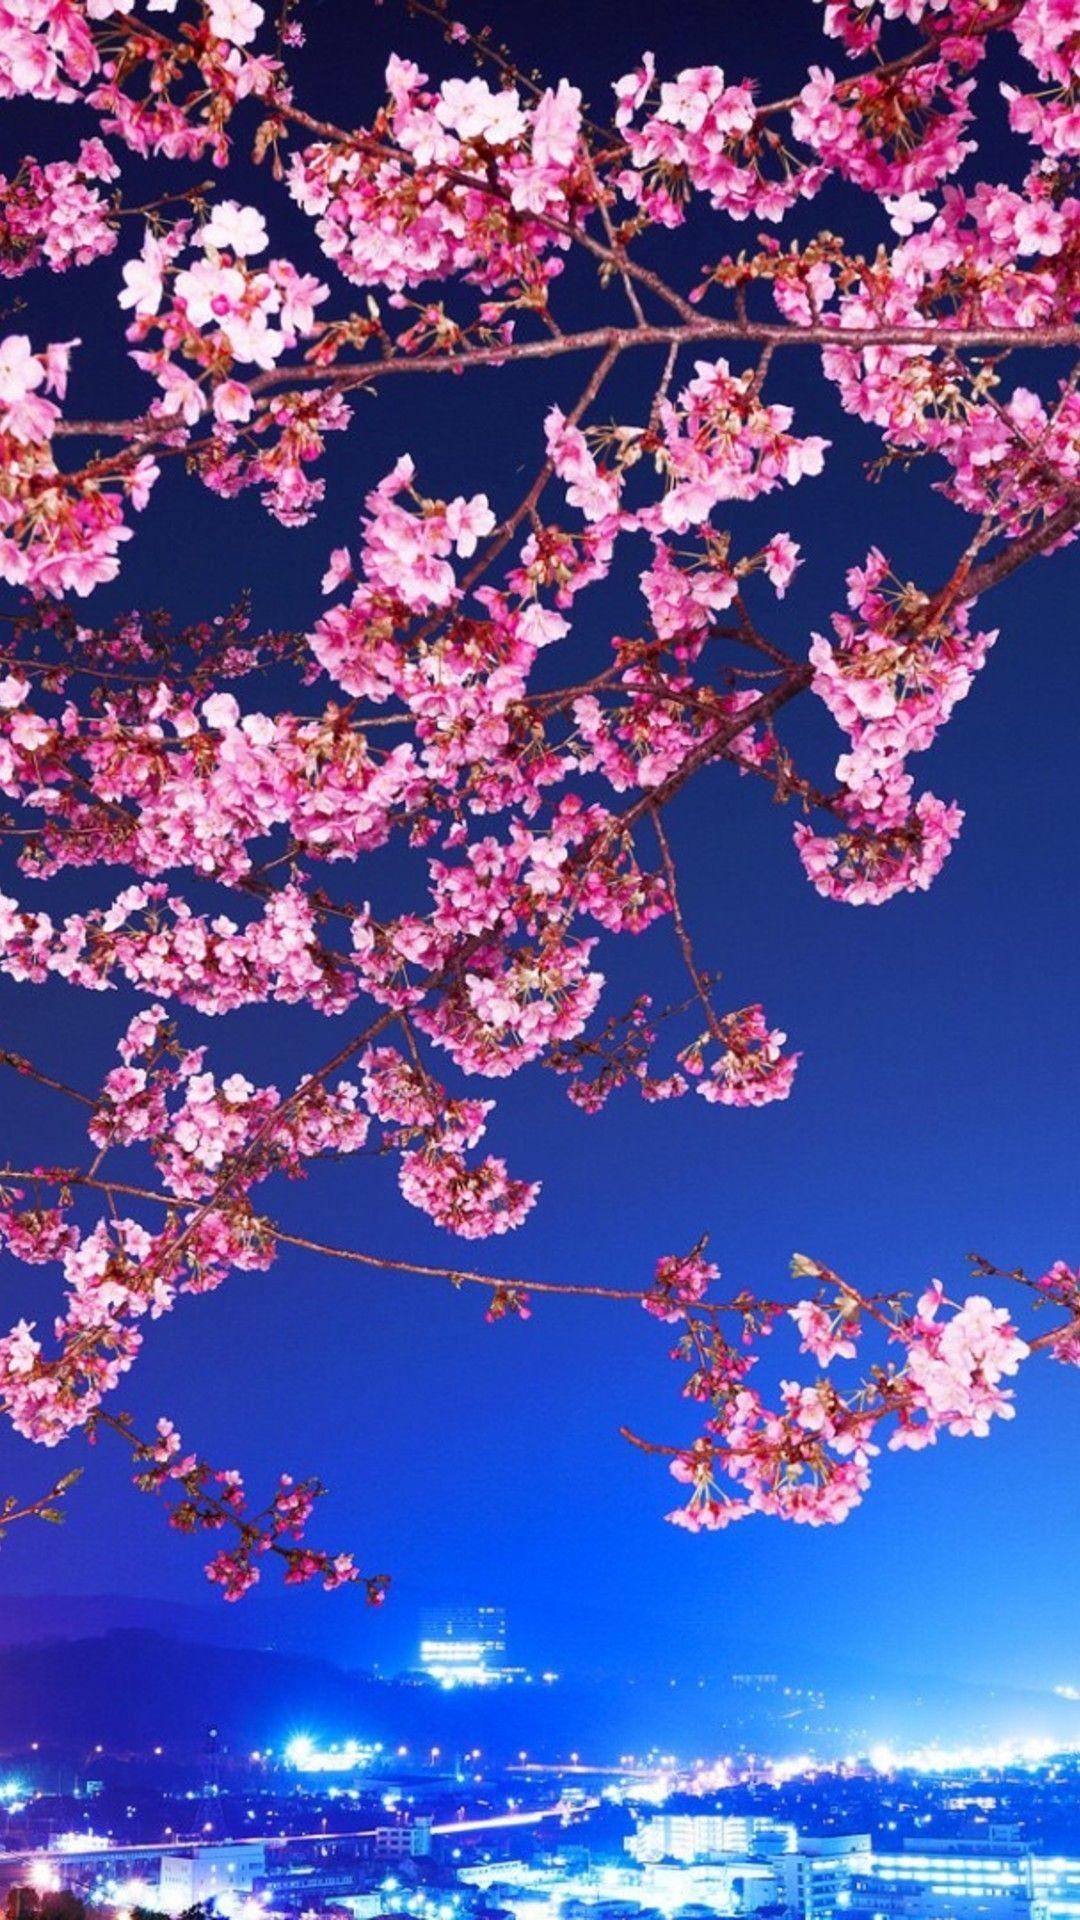 Anime Blossom Wallpapers